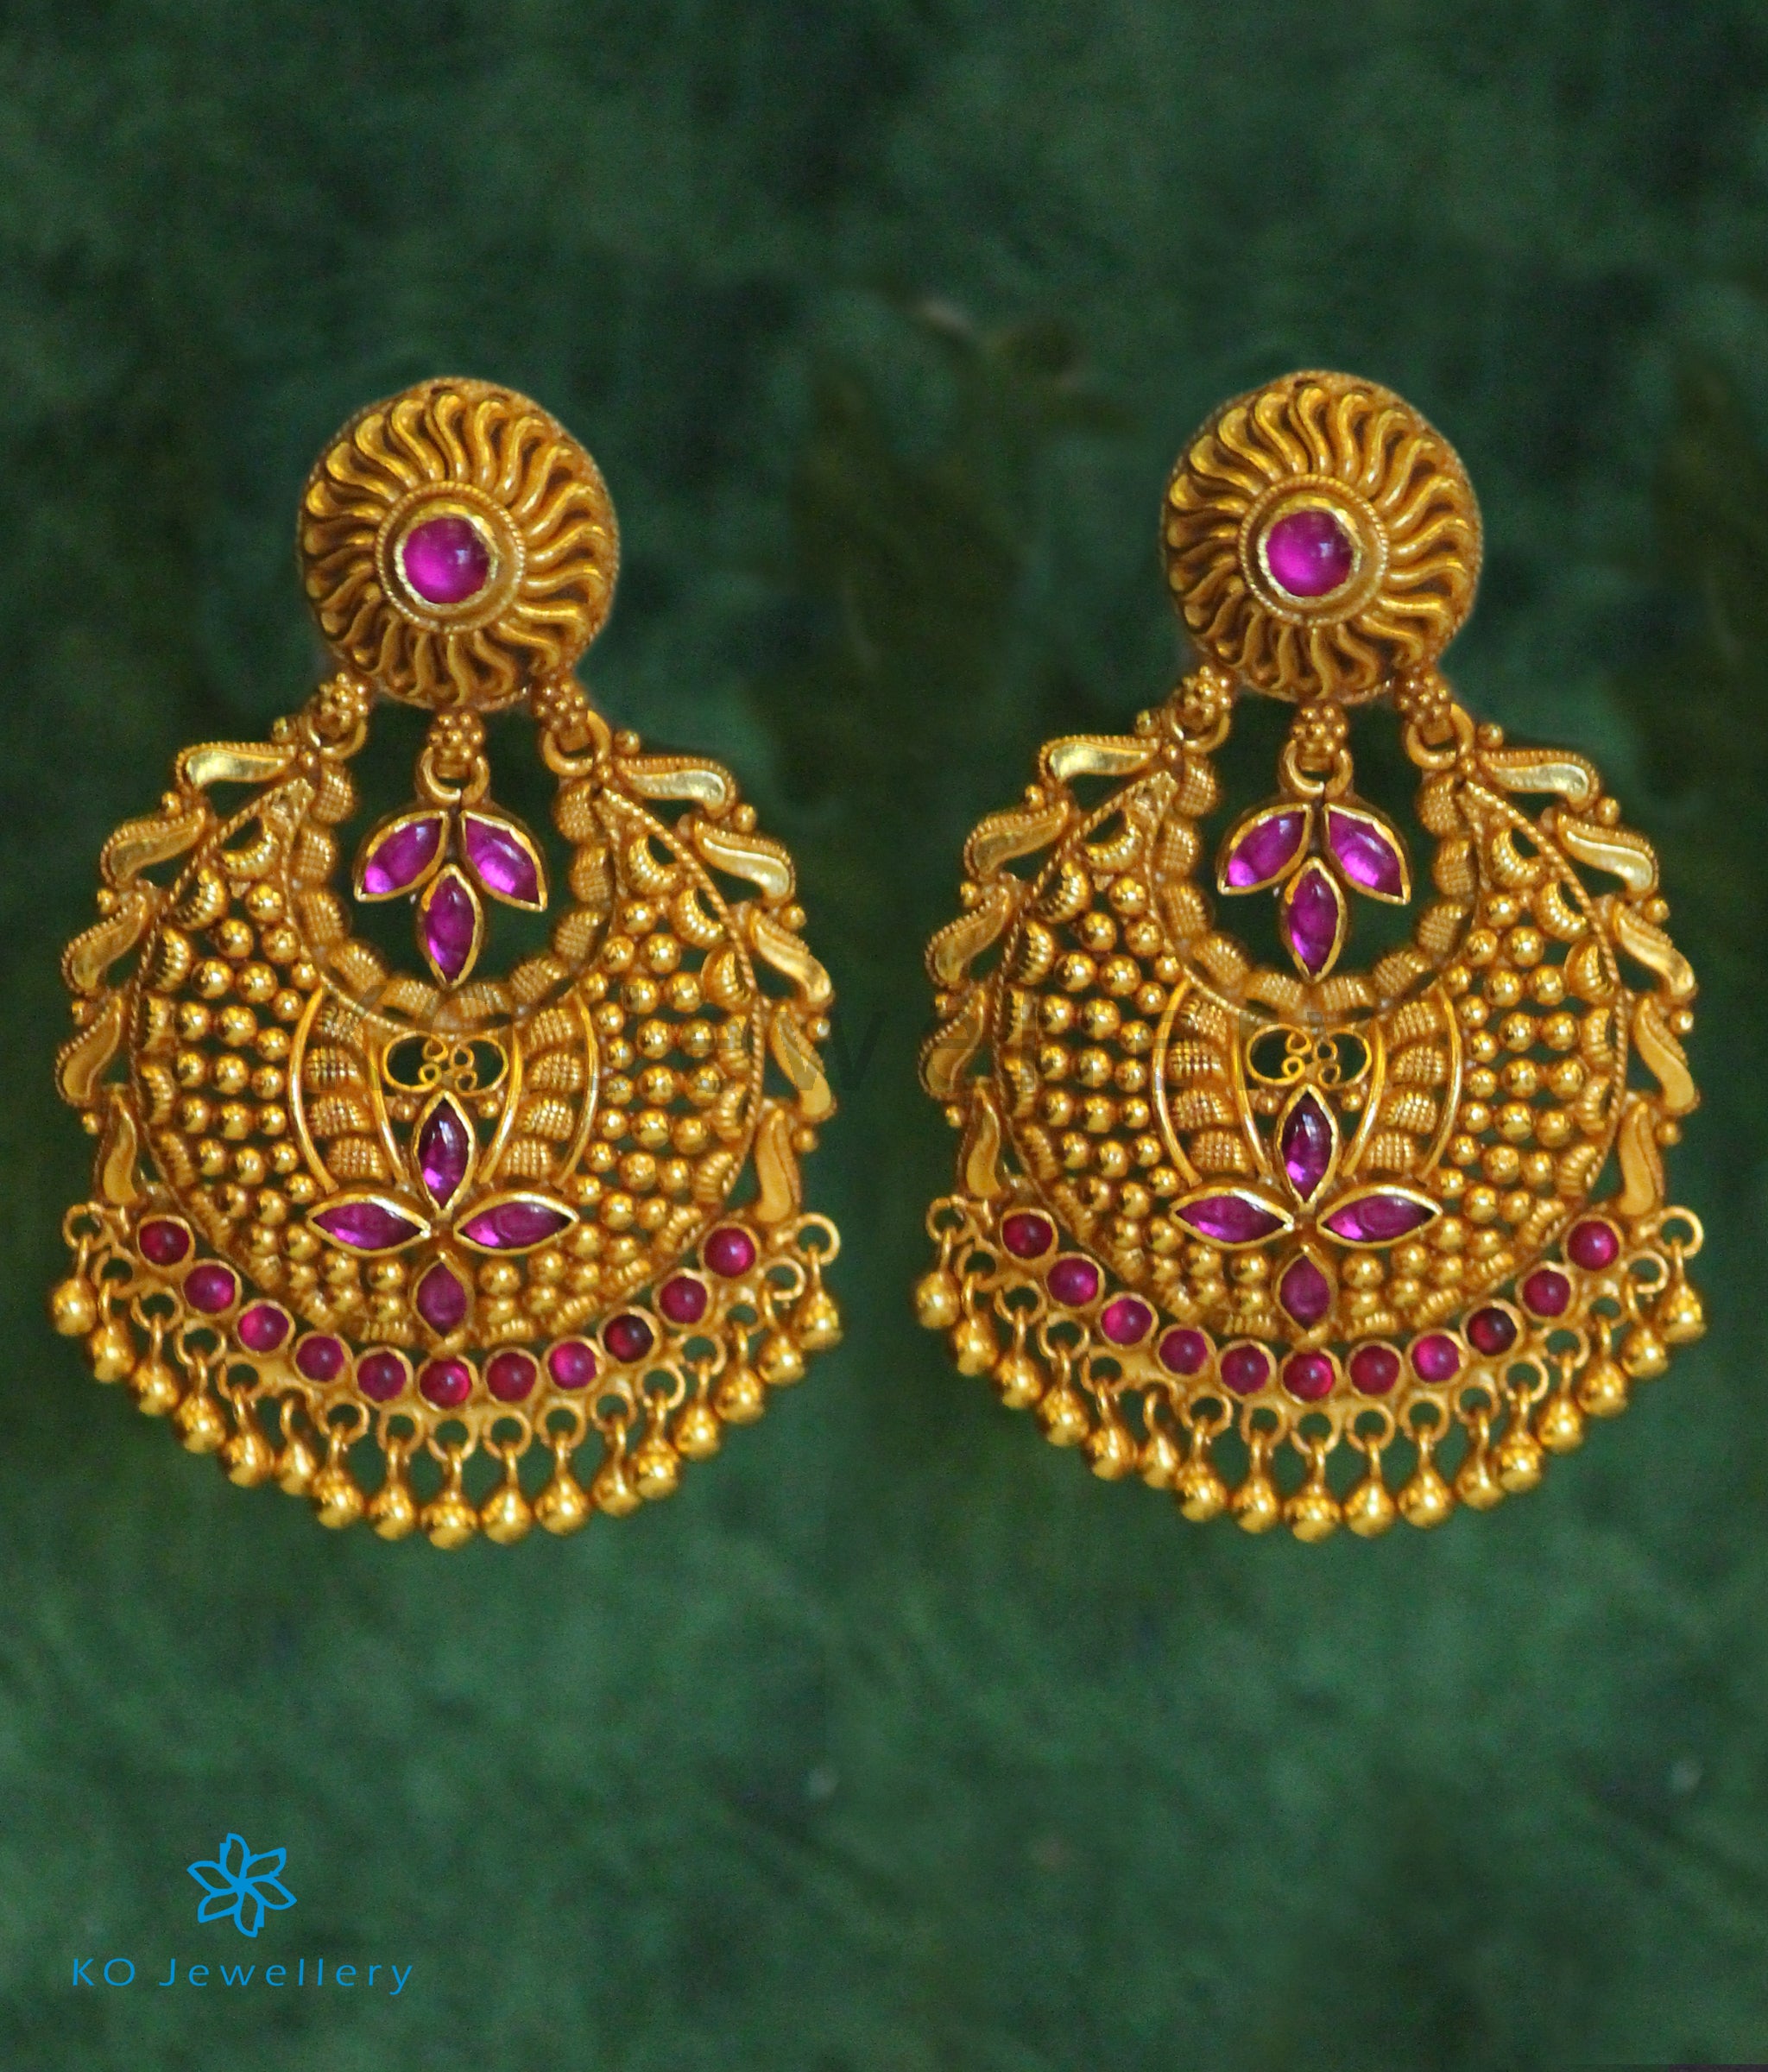 Abharan Jewellers - Wrap and adorn your ears with our special ear-cuff  jhumkas with hanging pearls. Offer: ₹100 off on per gram of gold and 5% off  on diamonds.Avail the offer here: